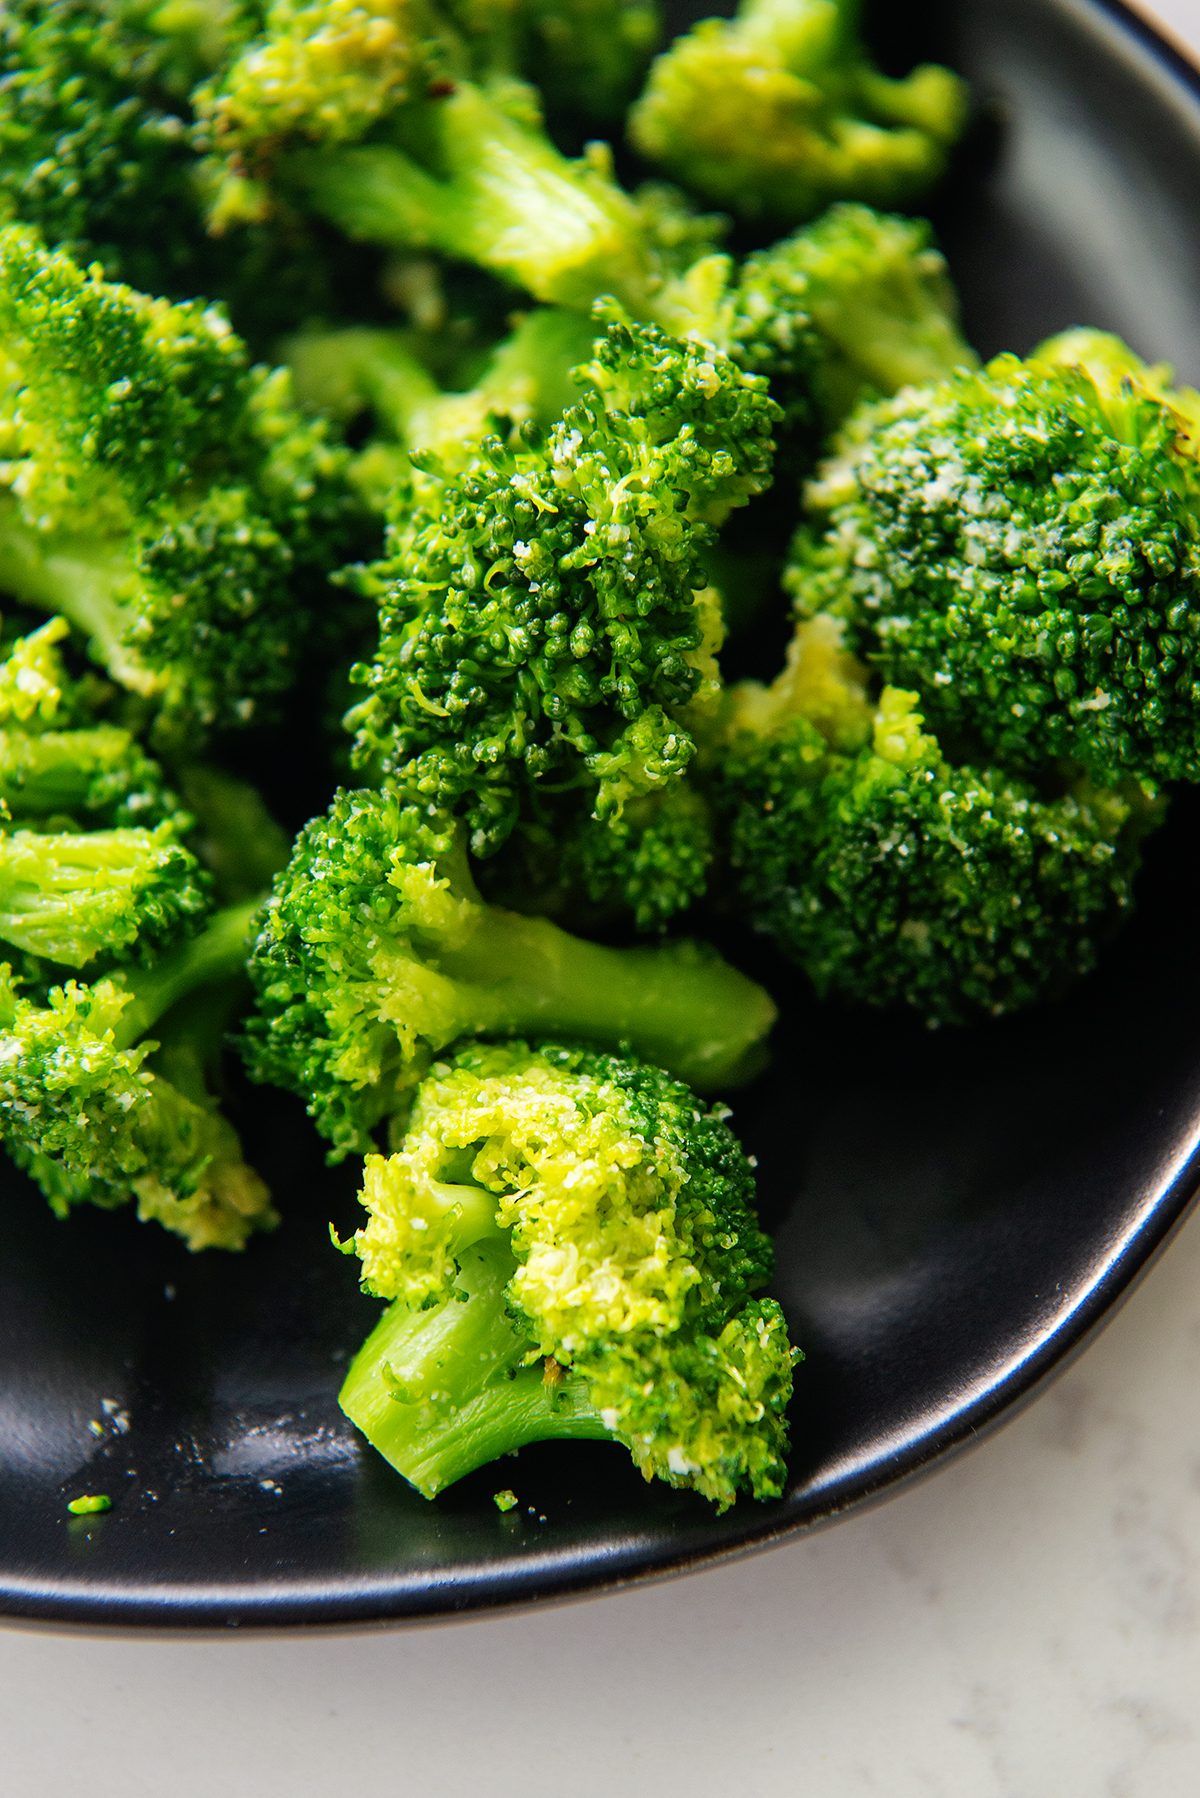 How To Make Frozen Broccoli in the Air Fryer | Airfried.com